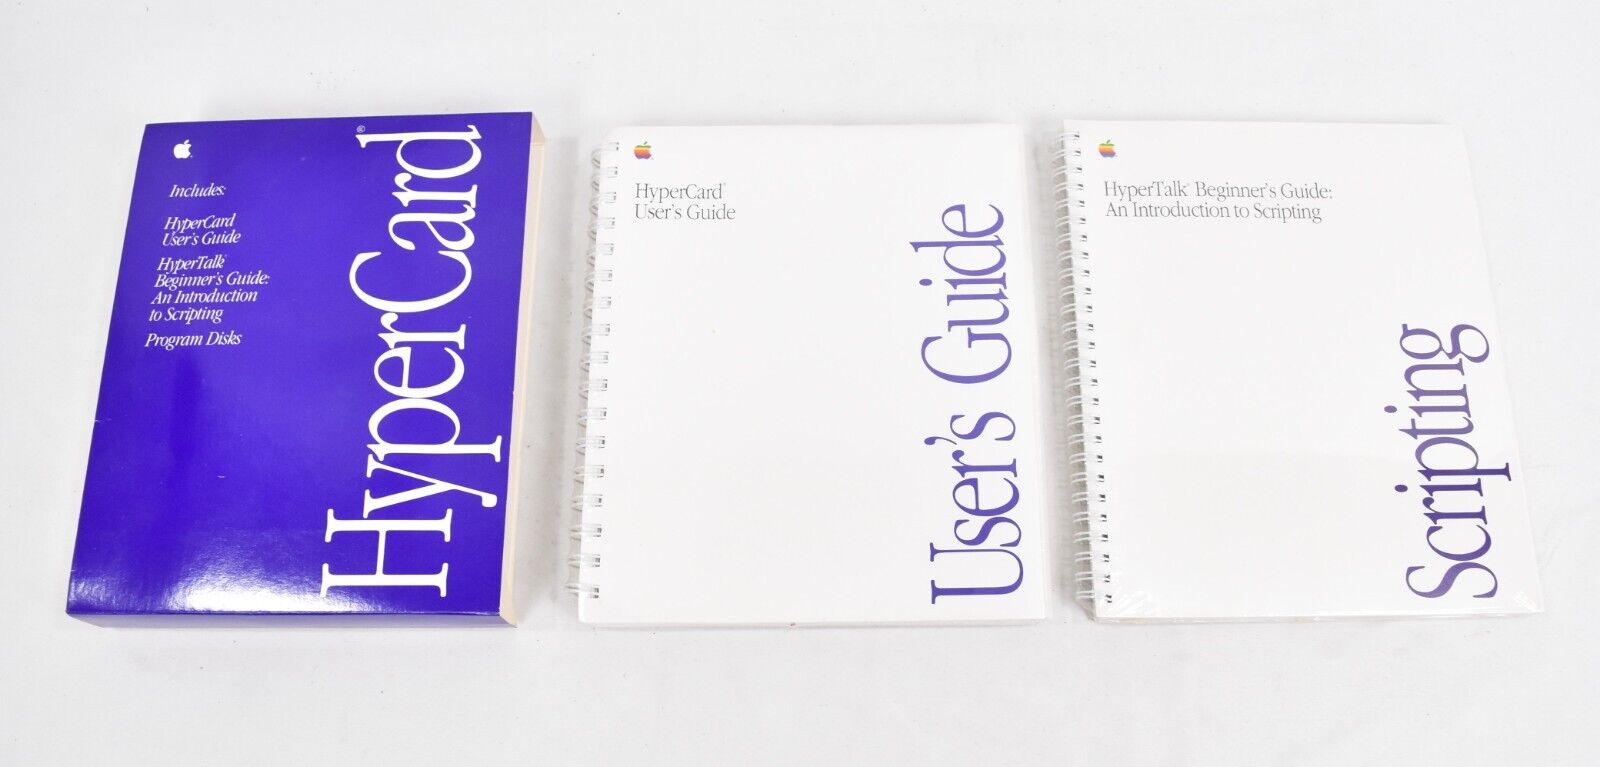 Vintage HyperCard User's Guide and Program Disks 914-0521-A